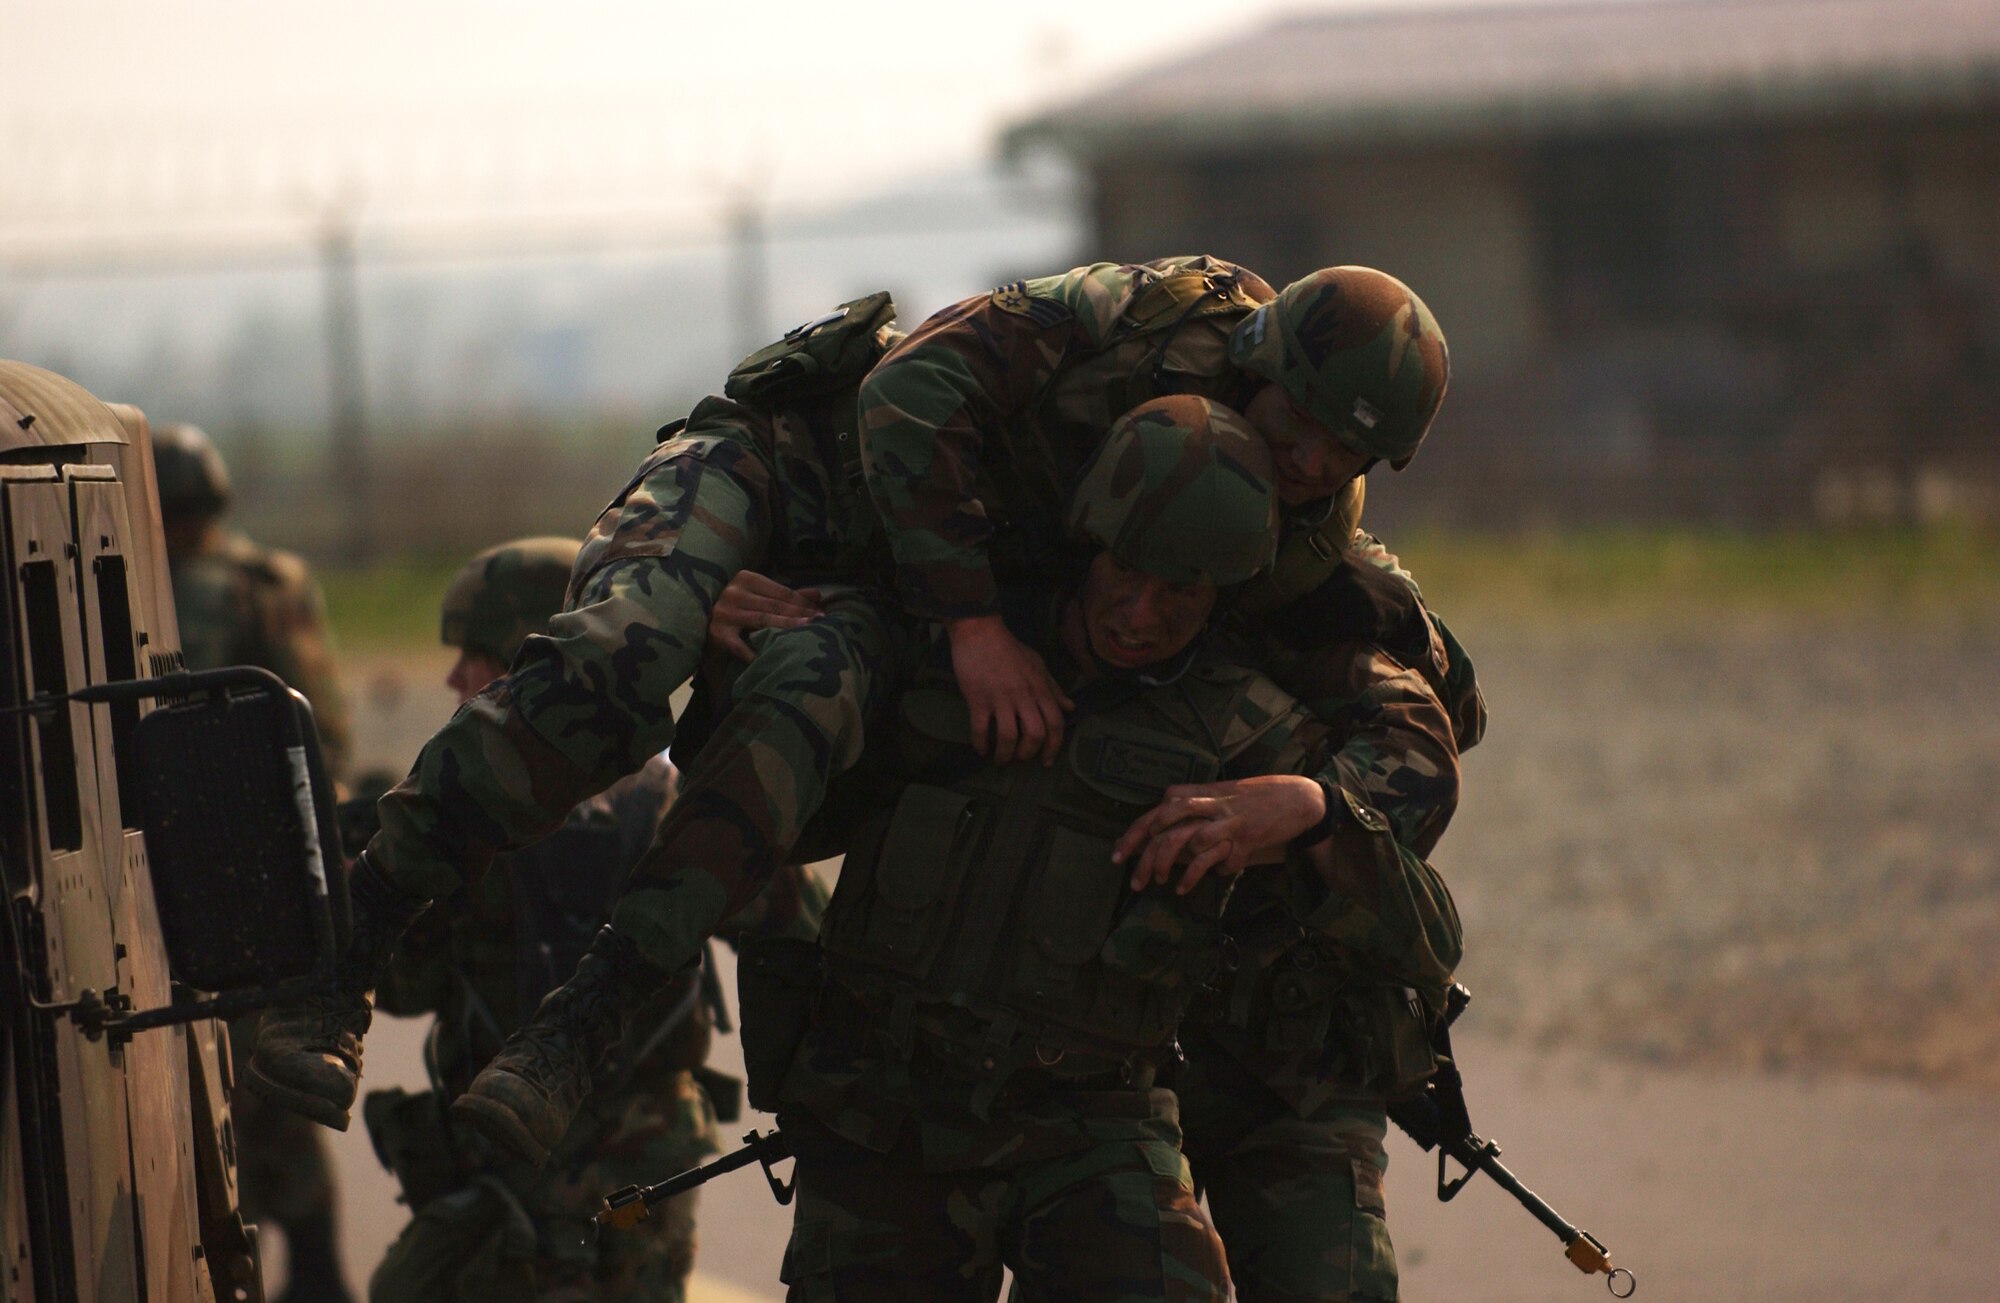 OSAN AIR BASE, Republic of Korea --  Airmen participate in a field training exercise at Commando Warrior here last year. (U.S. Air Force photo by Airman 1st Class Gina Chiaverotti